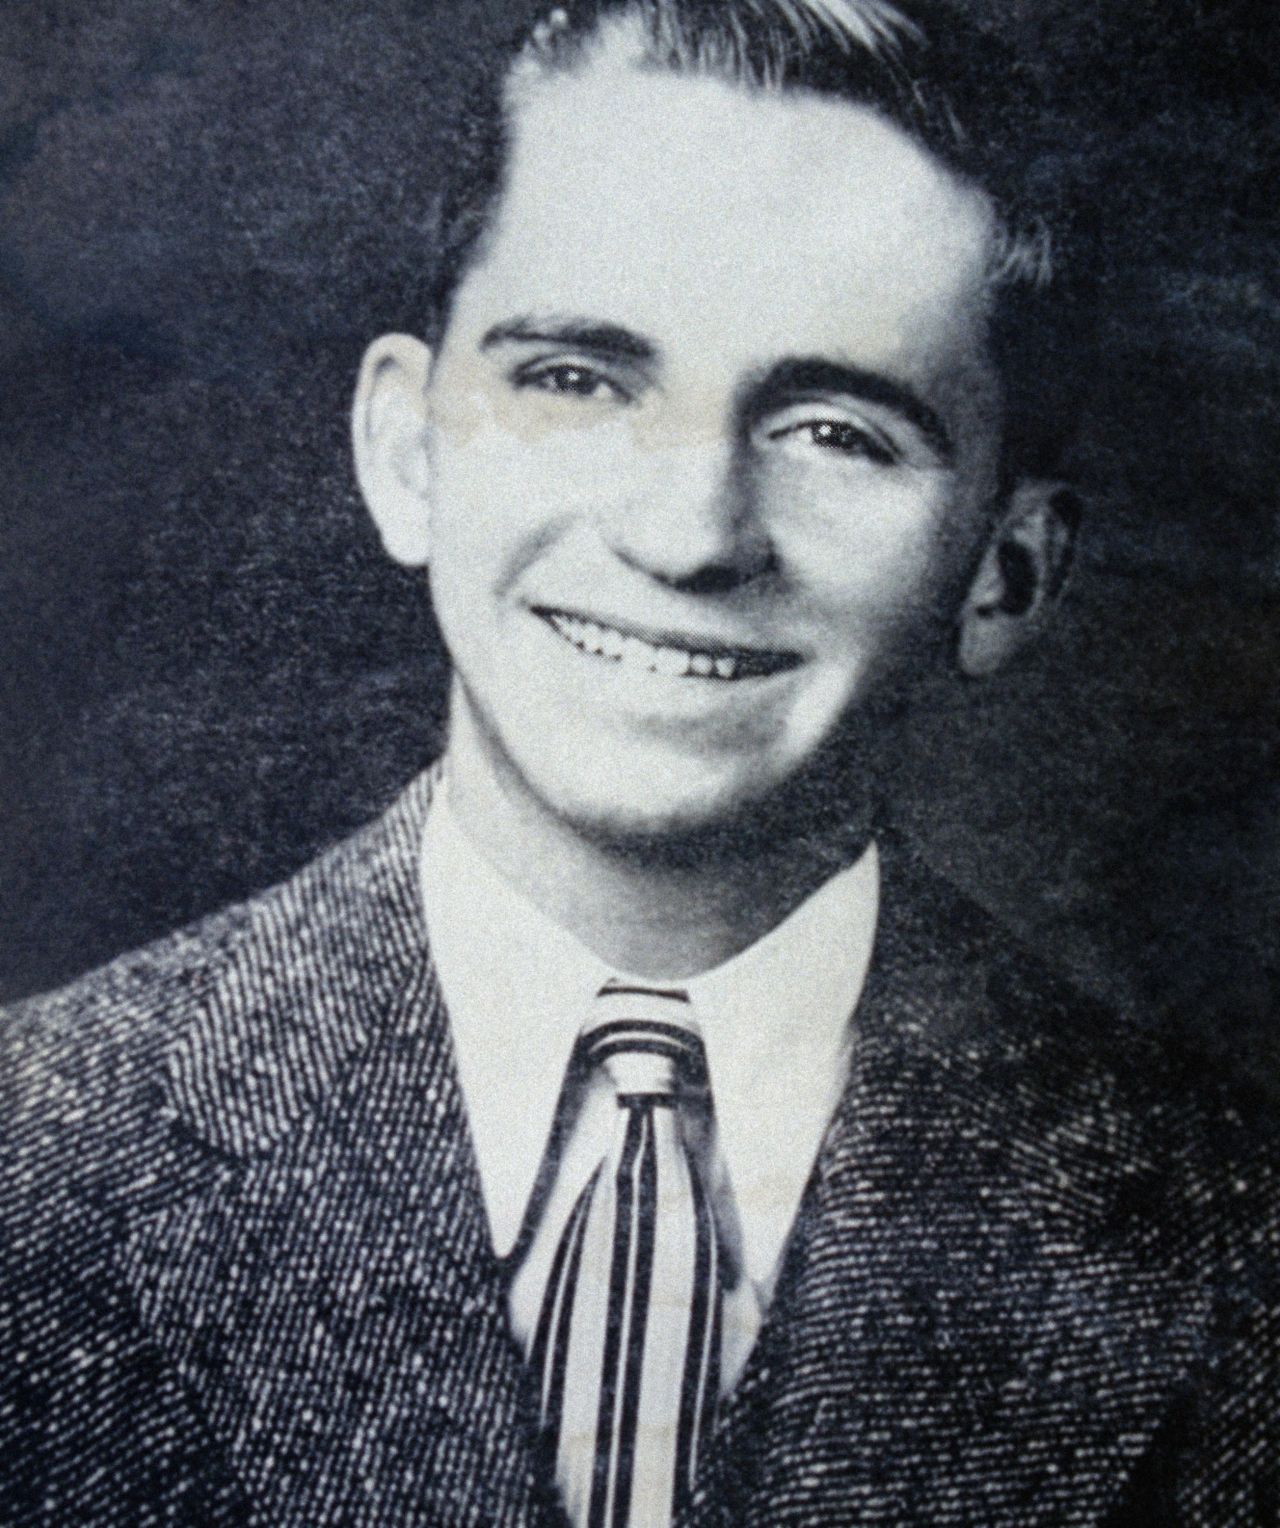 Perot grew up in Texarkana, Texas, a small town that straddles the Texas-Arkansas state line. This photo is from the 1949 Texarkana Junior College yearbook. Perot was class president.